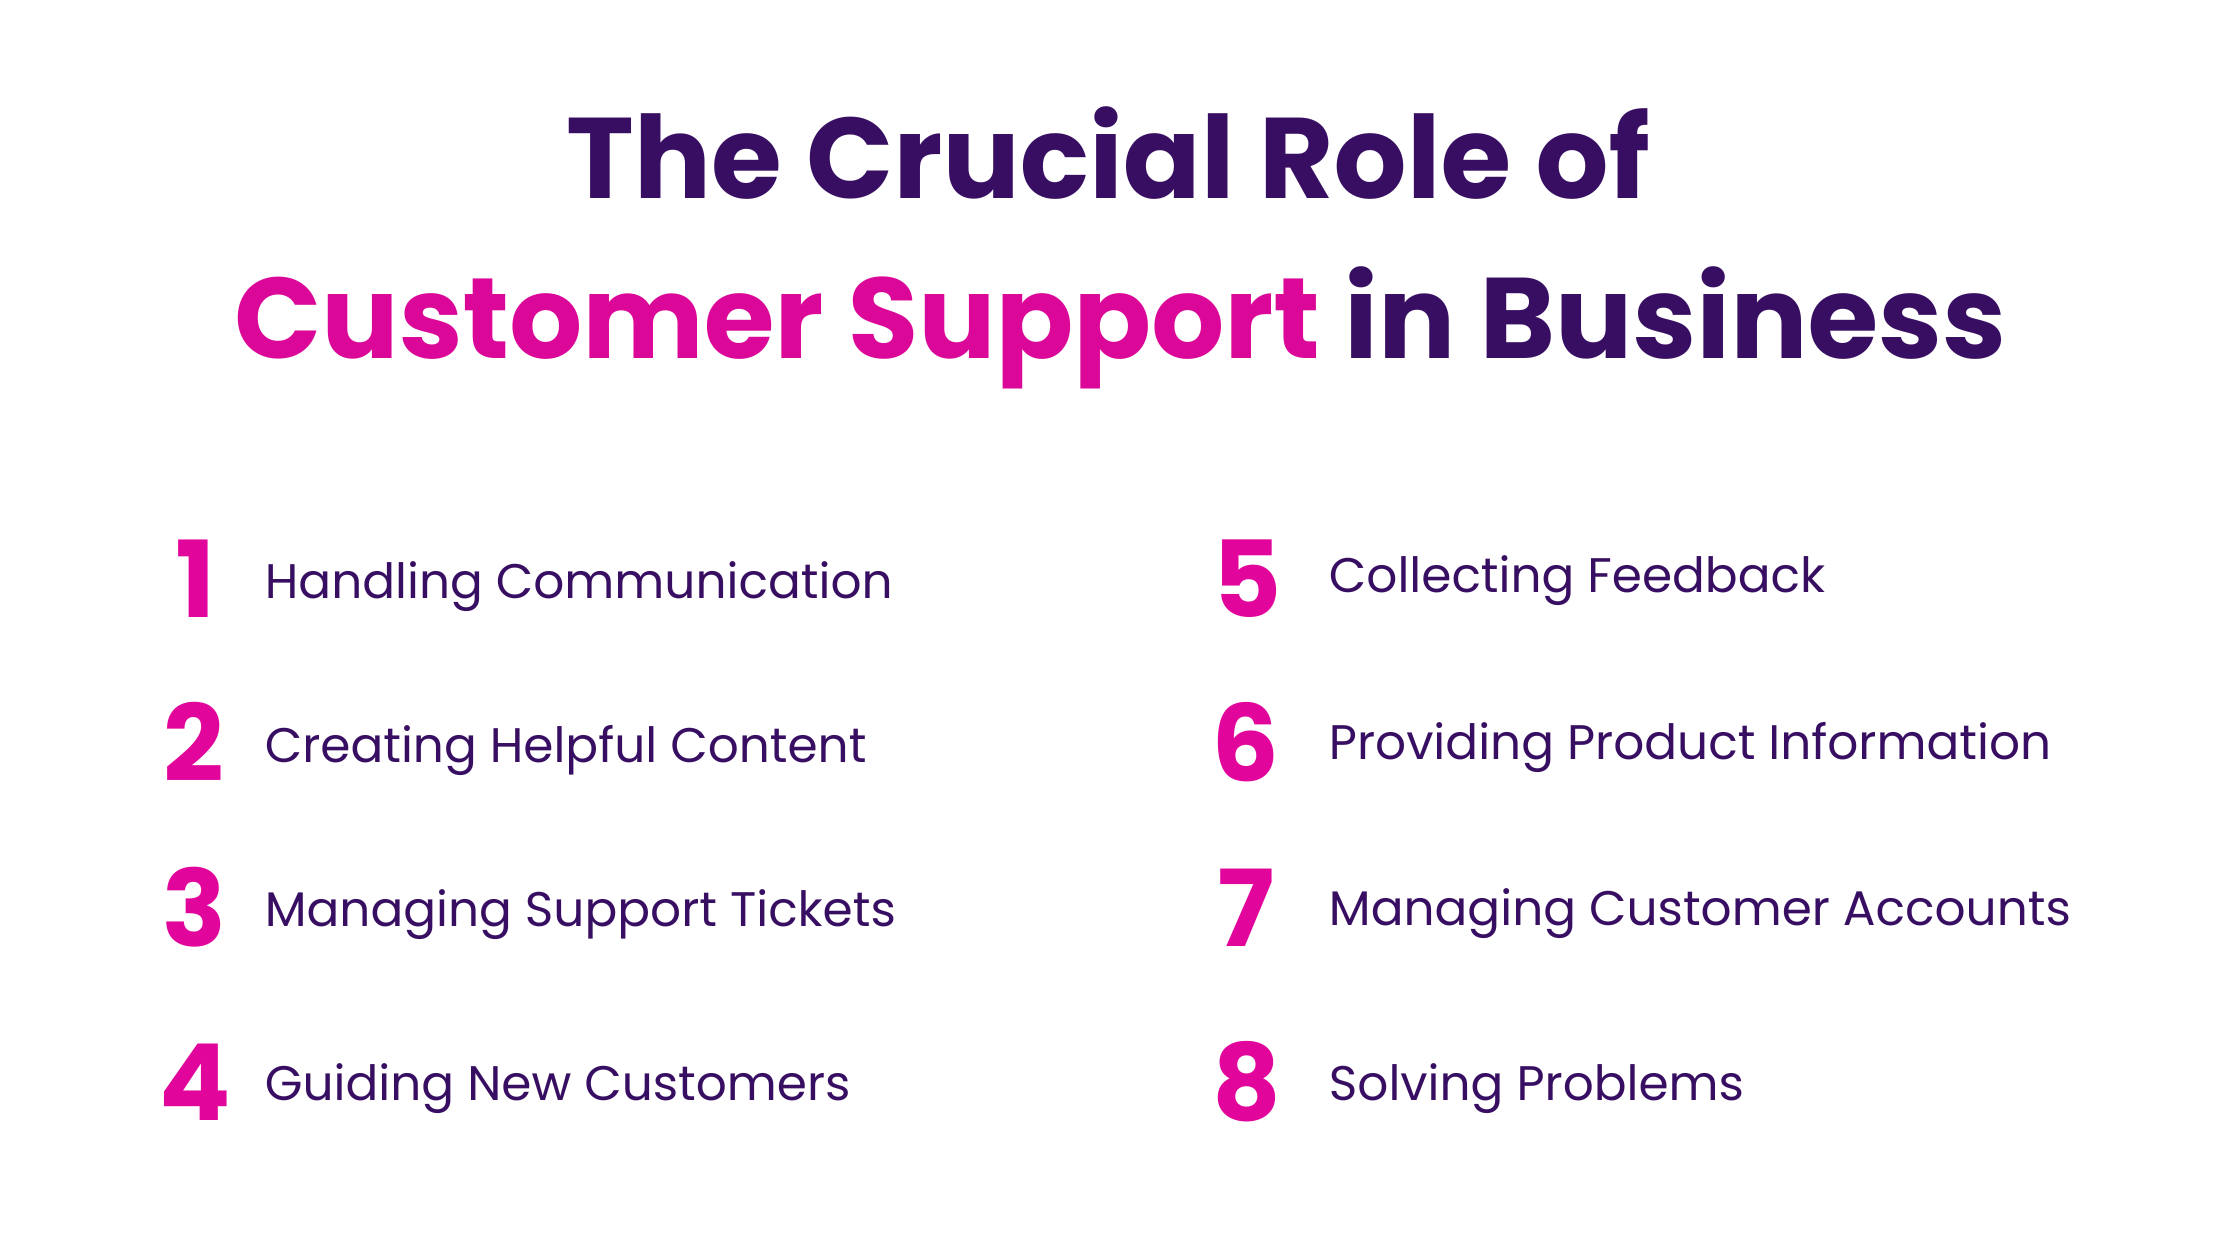 The Crucial Role of Customer Support in Business